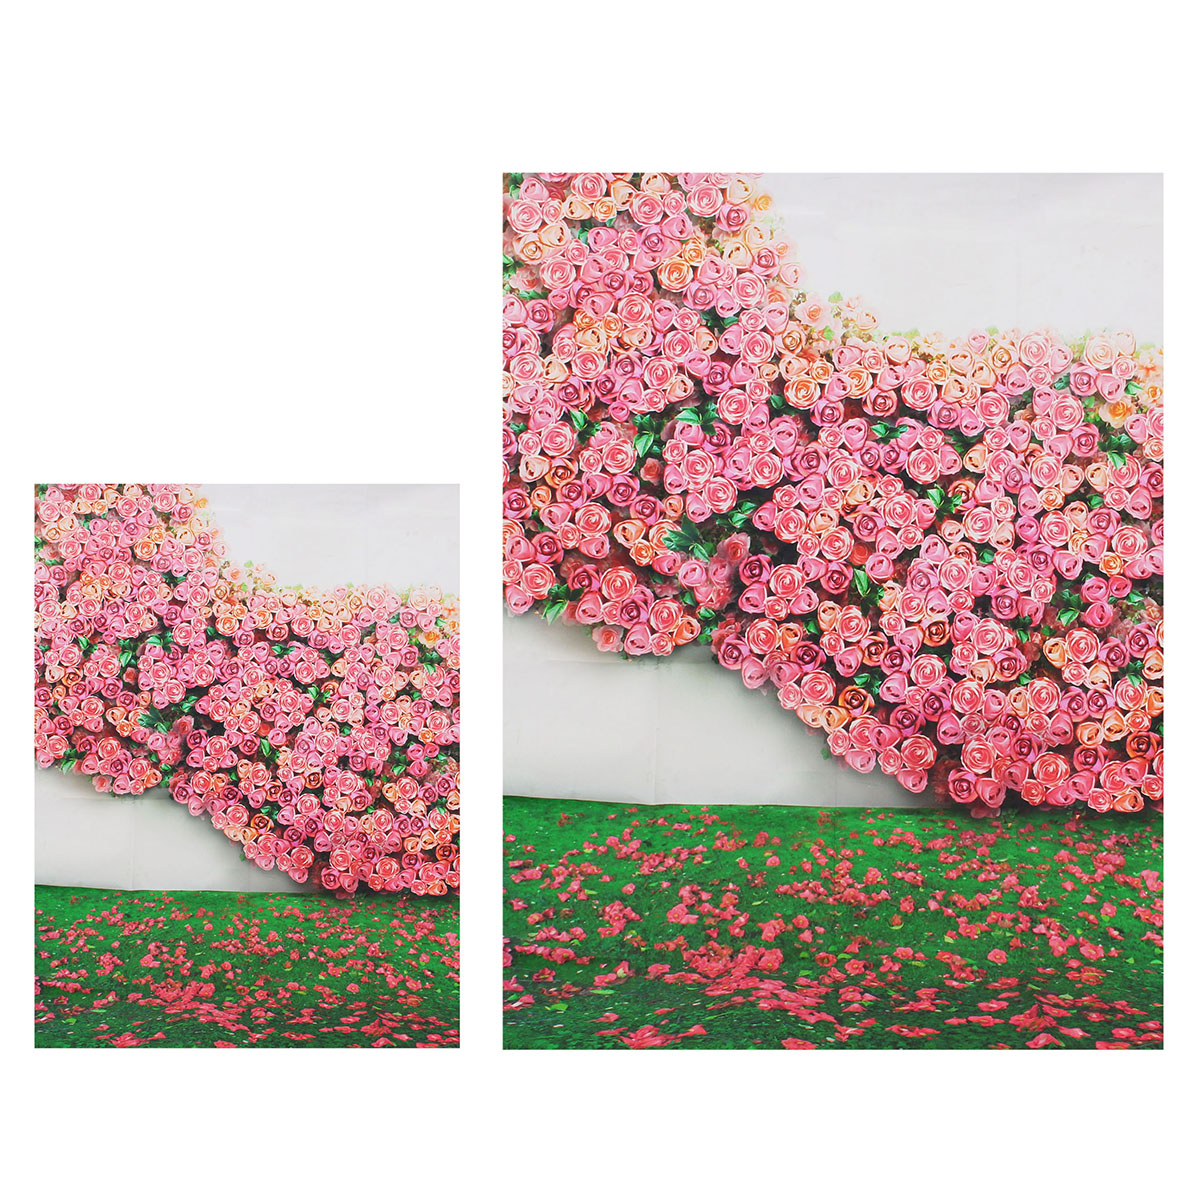 

3x5FT 5x7FT Rose Flower Wall Glass Floor Photography Backdrop Background Studio Prop